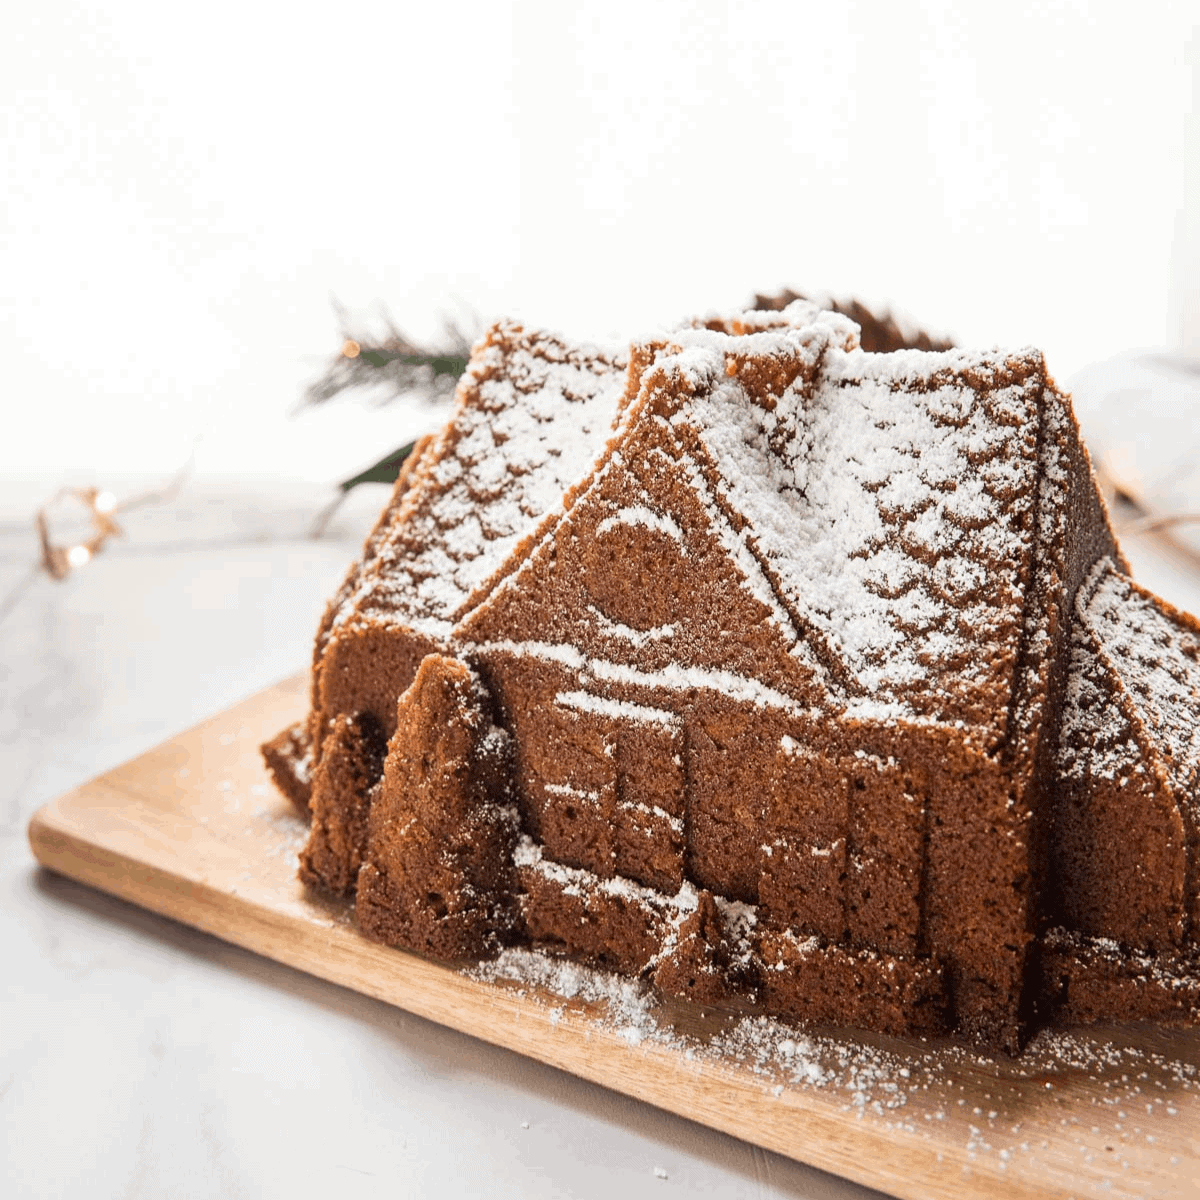 https://hungerthirstplay.com/wp-content/uploads/2019/12/Easy-Gingerbread-House-Square.png